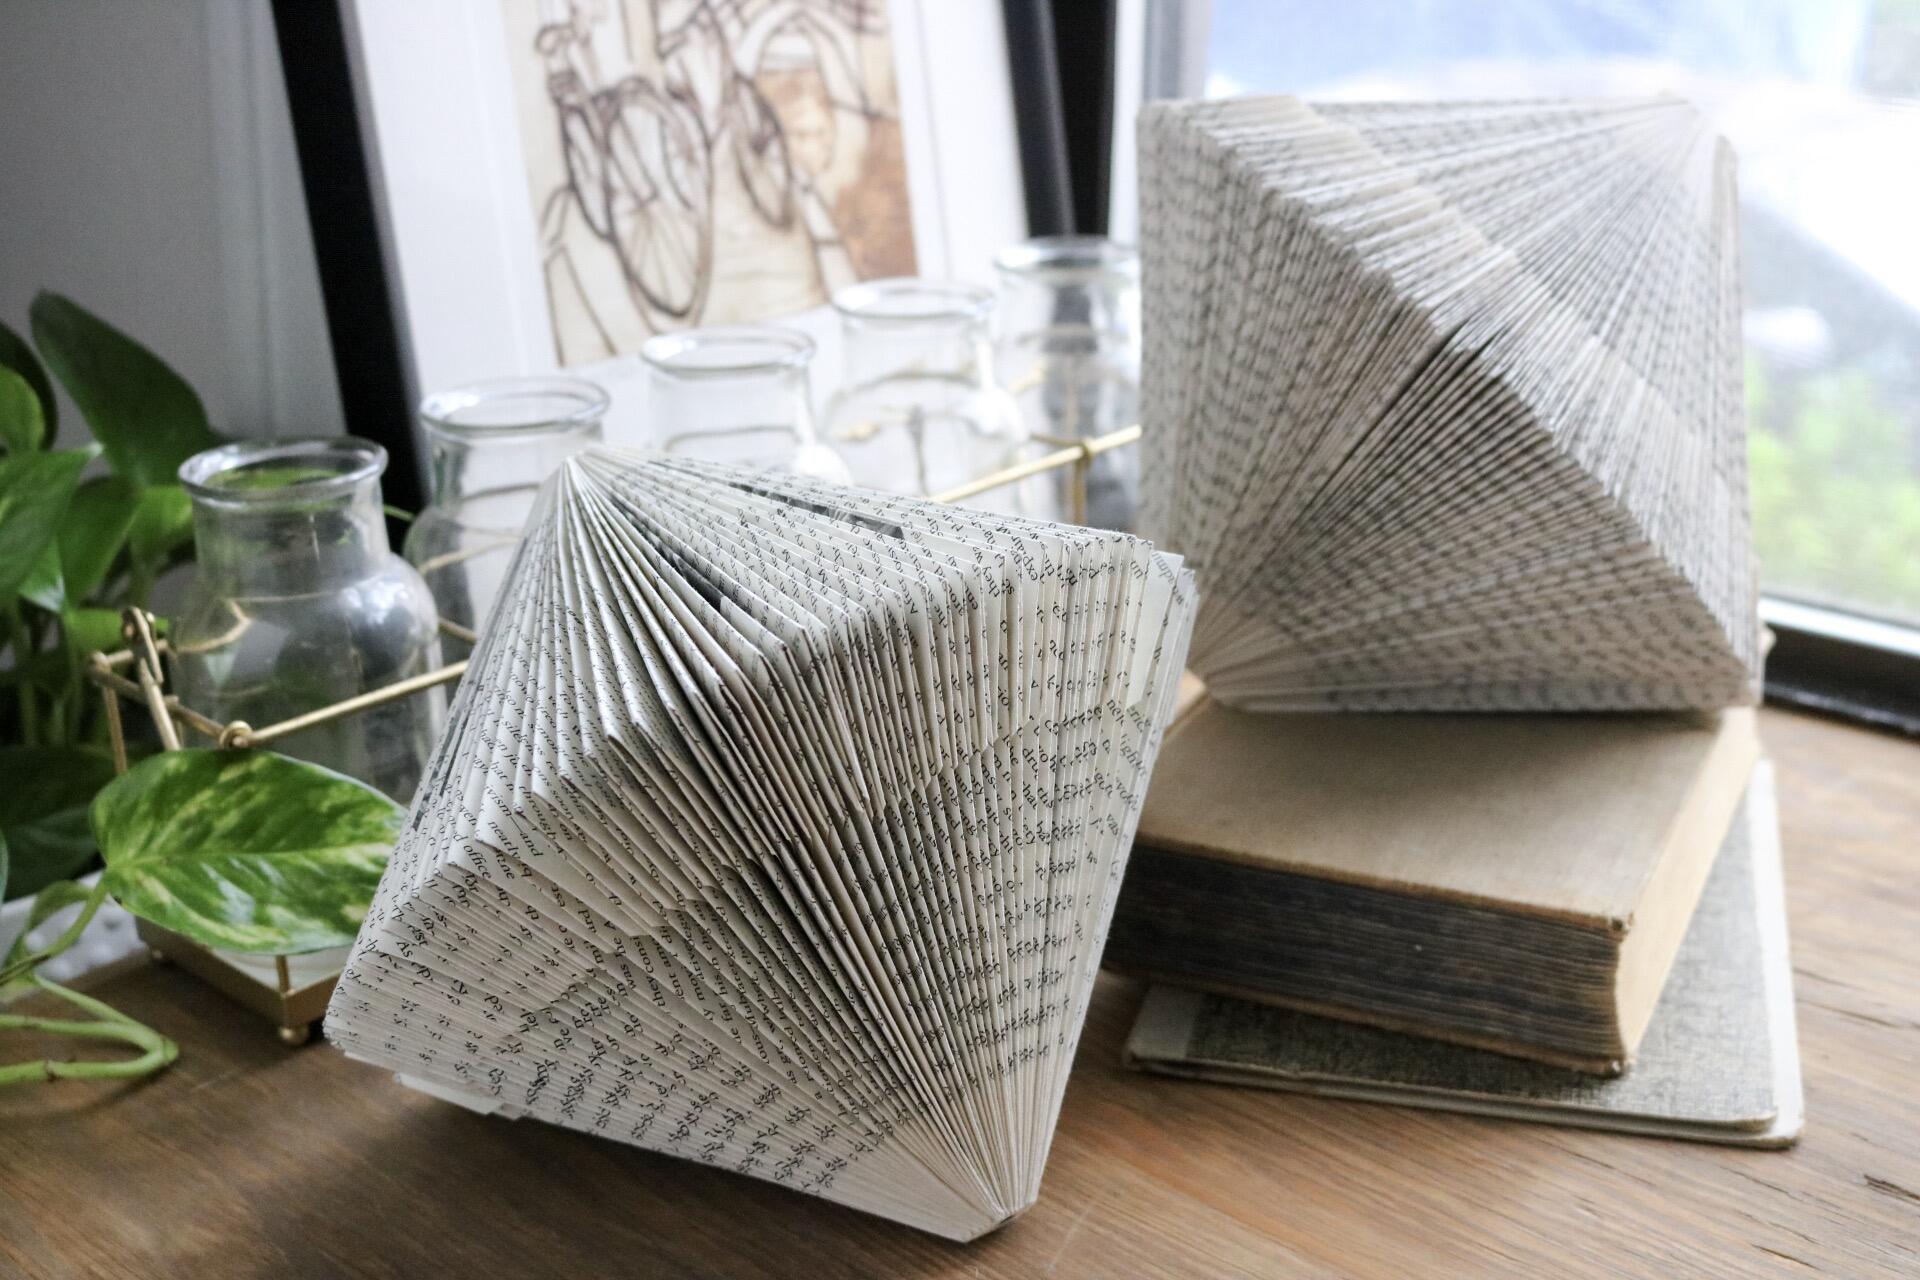 How To Make Folded Book Art Sculpture